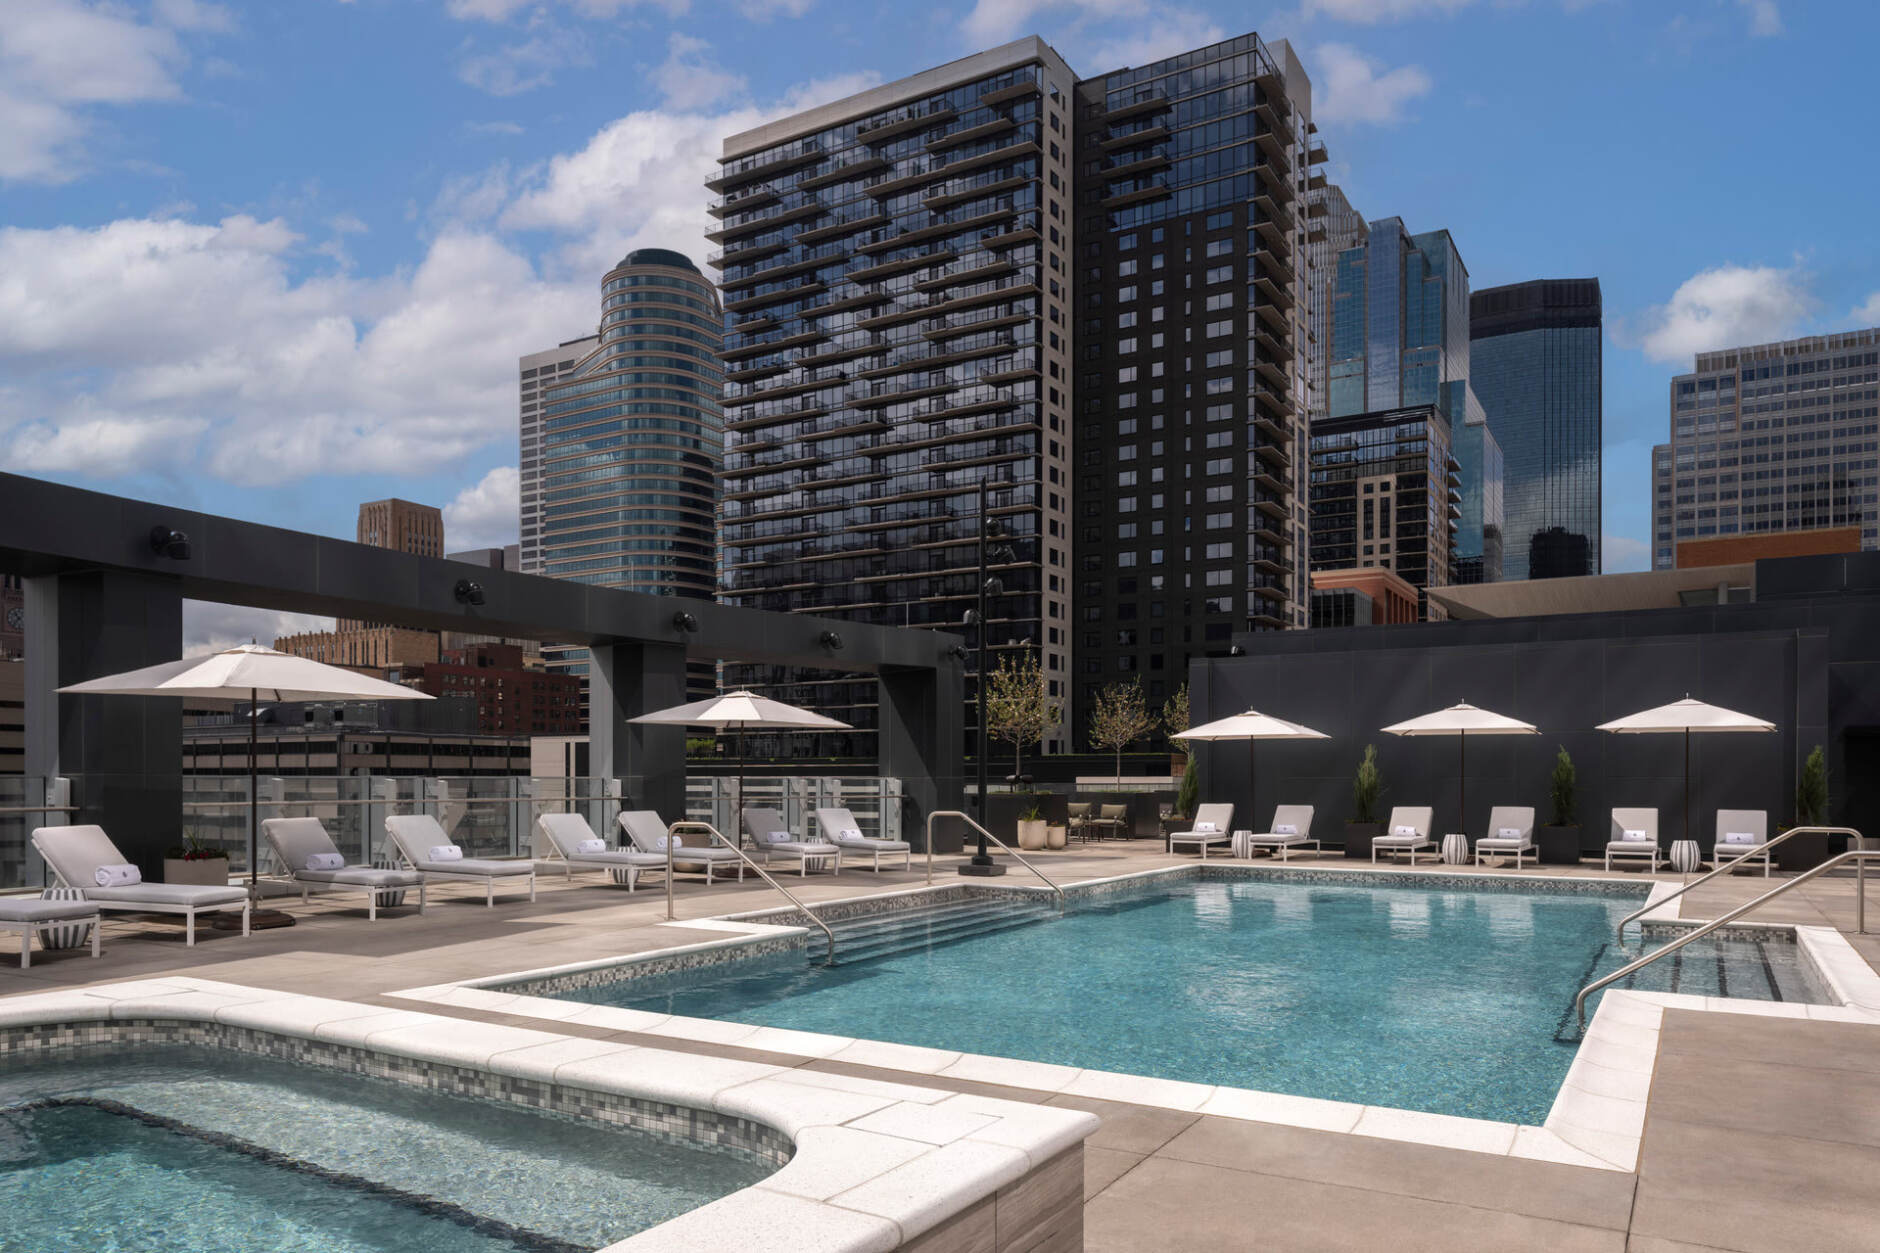 ROH New Hotel Openings: The pool deck at Four Seasons Minneapolis